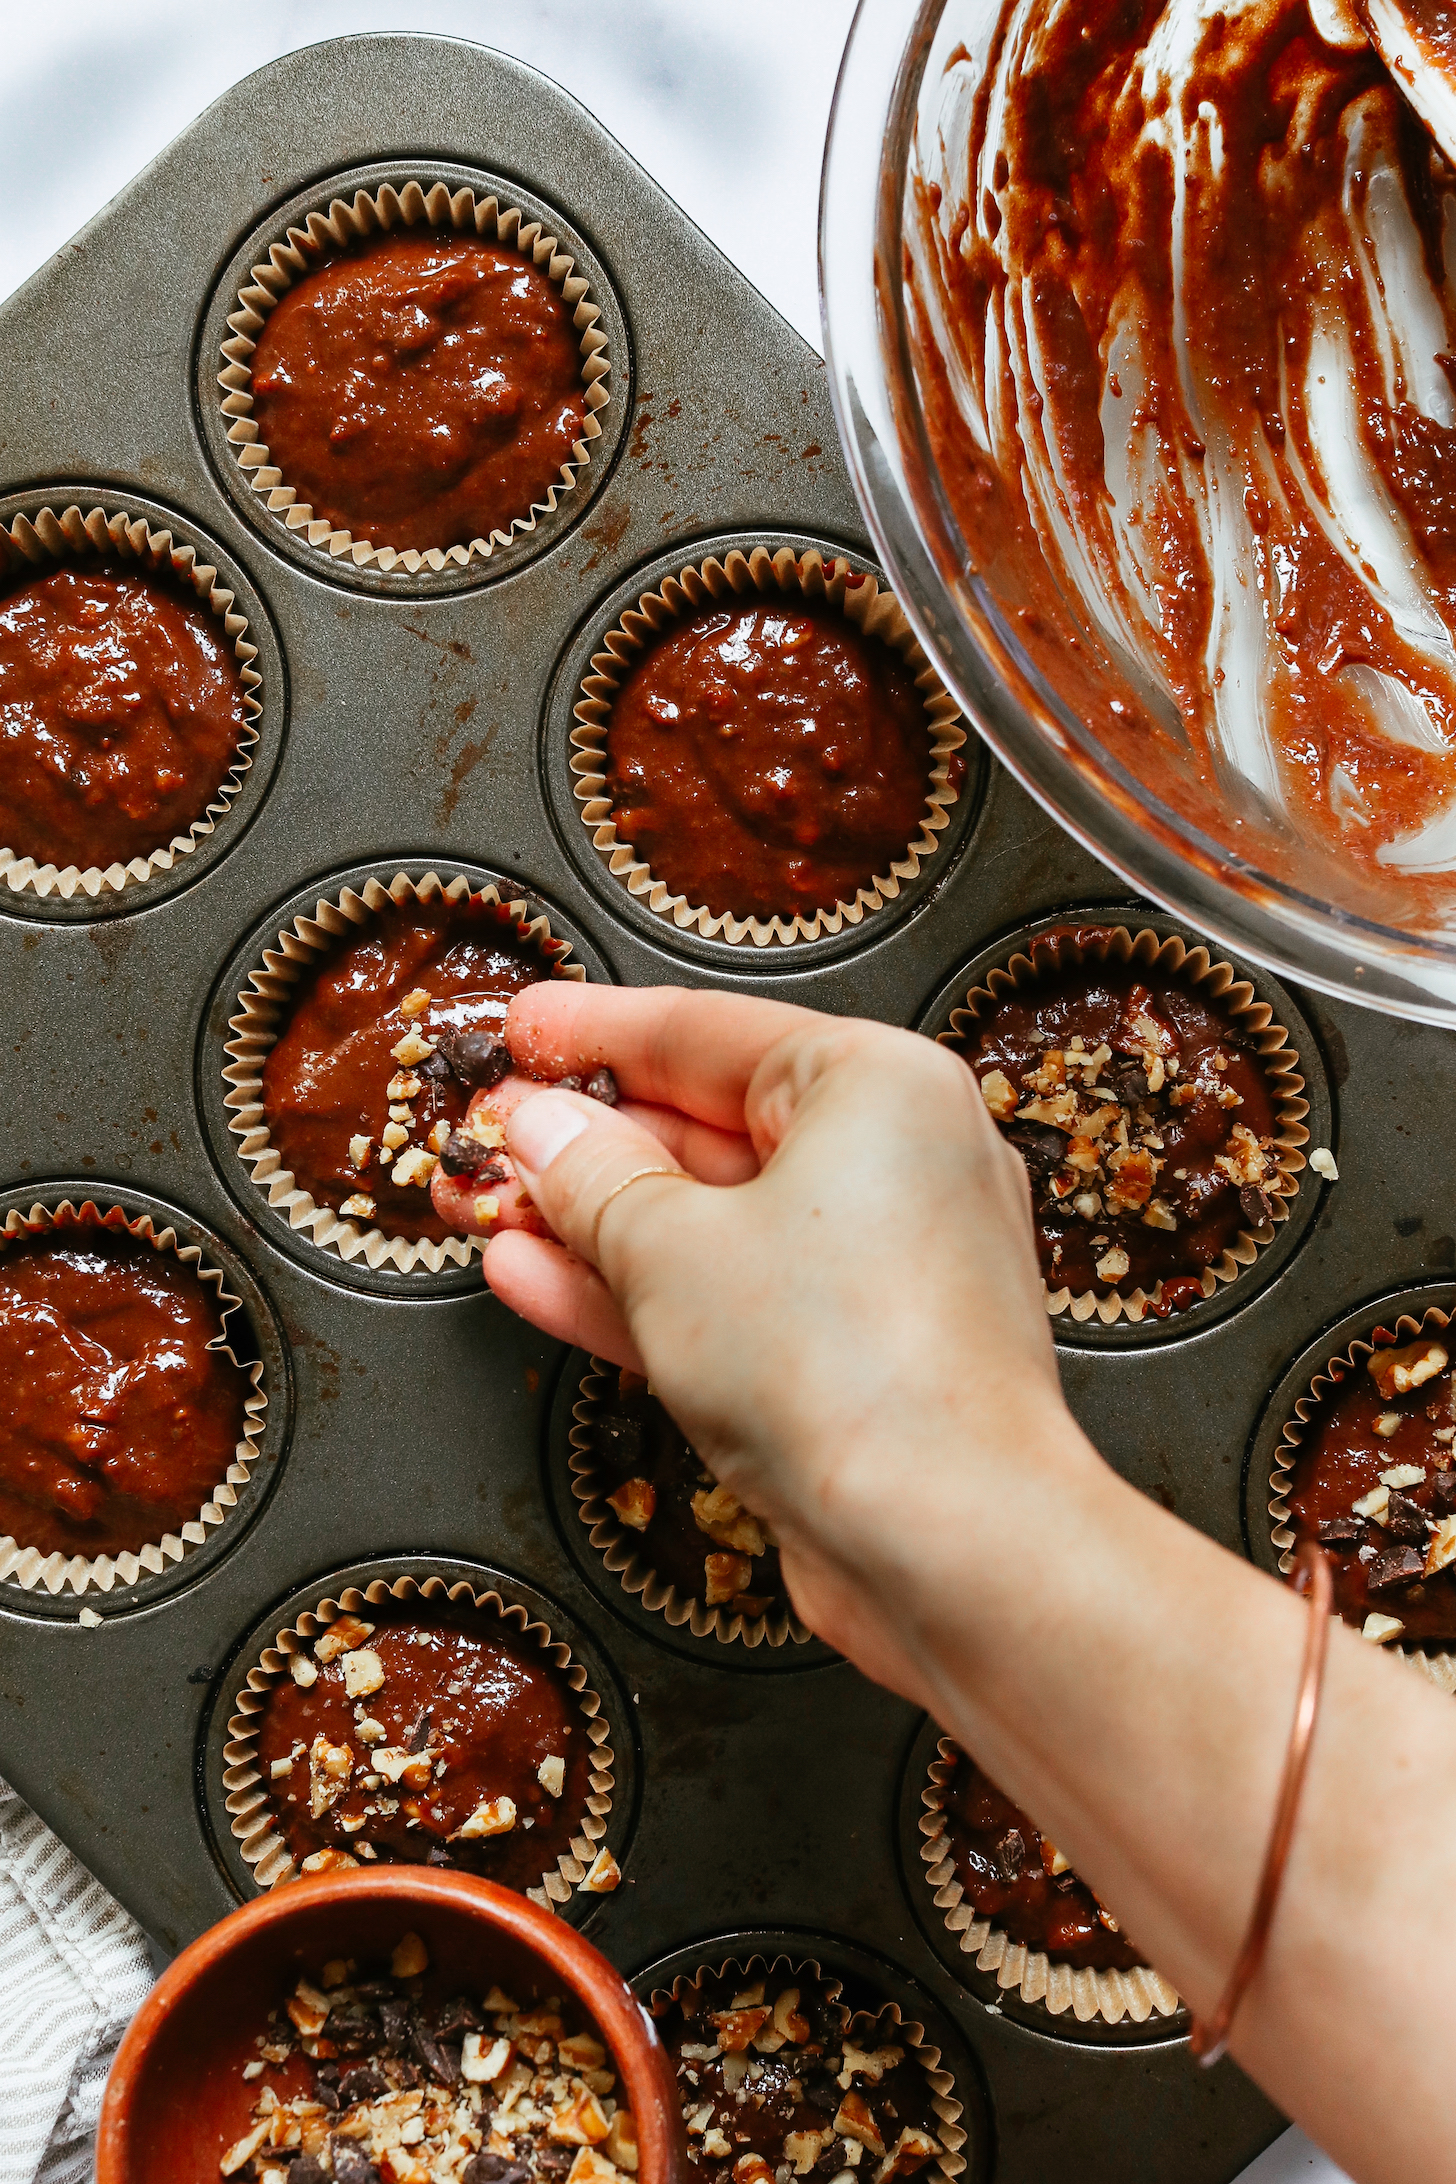 Sprinkling chopped walnuts and chocolate chips over batter in a muffin tin